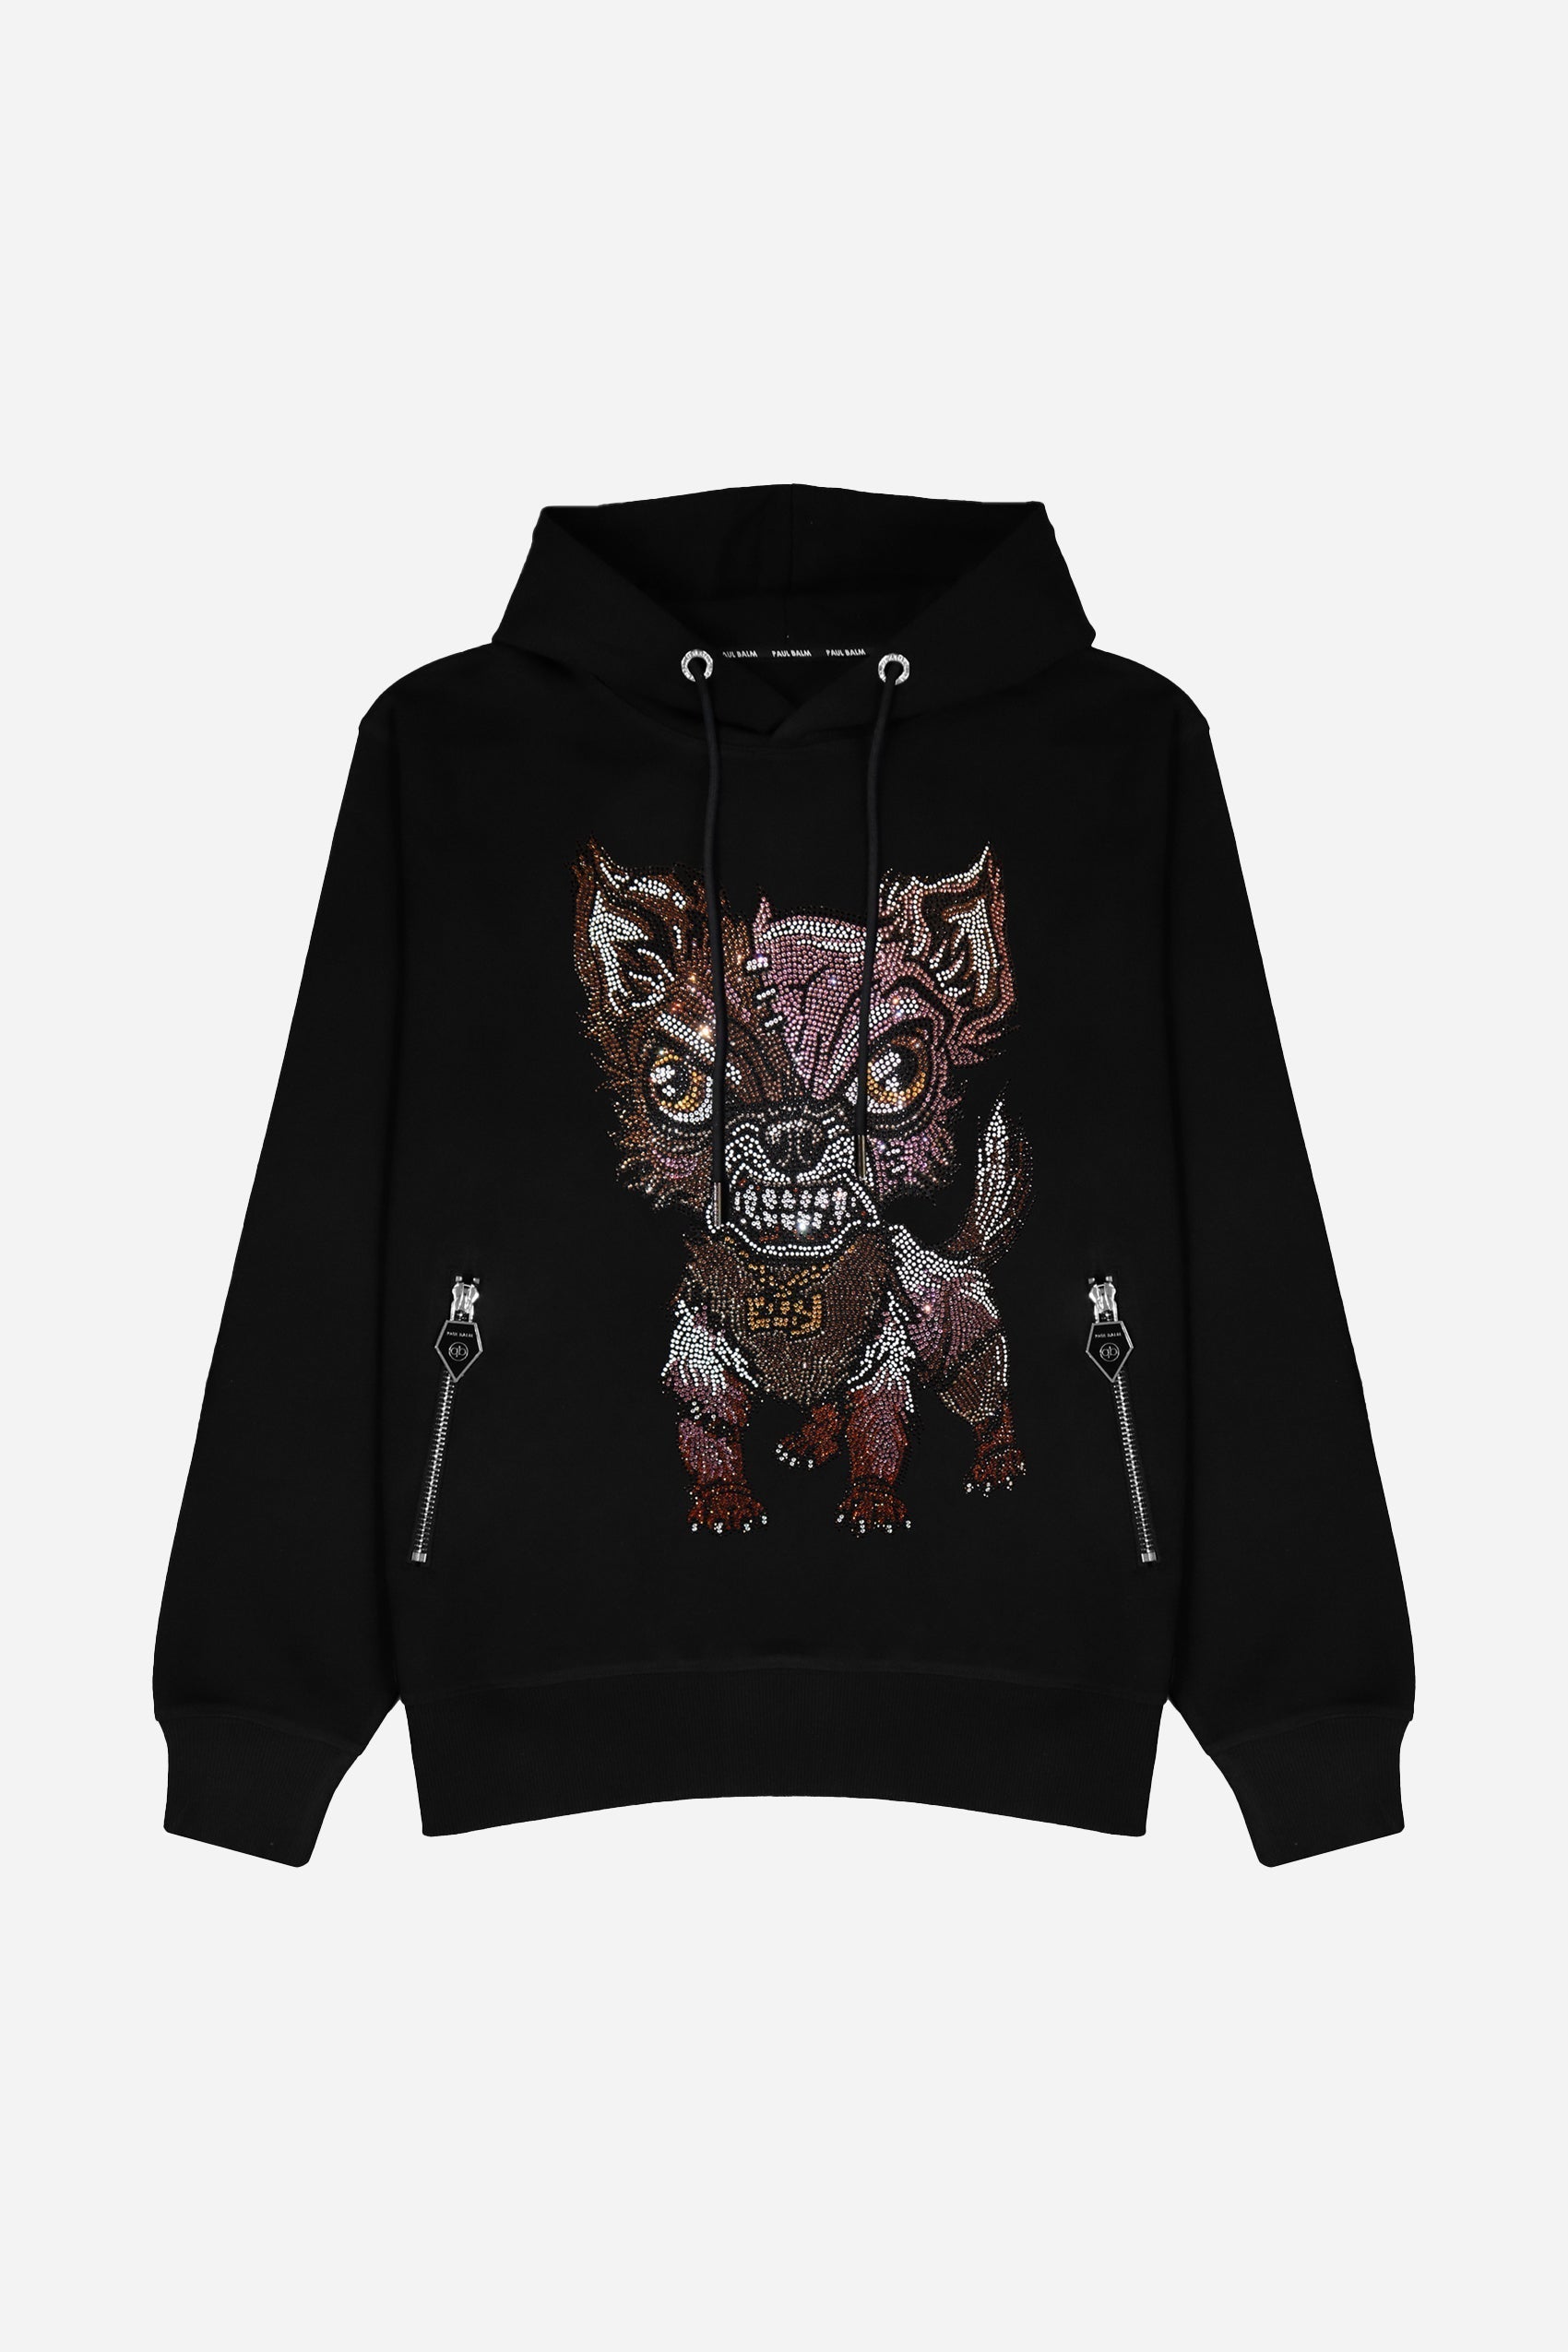 Crystal Elly Hoodie - Limited to 300 - PAUL BALM WORLD